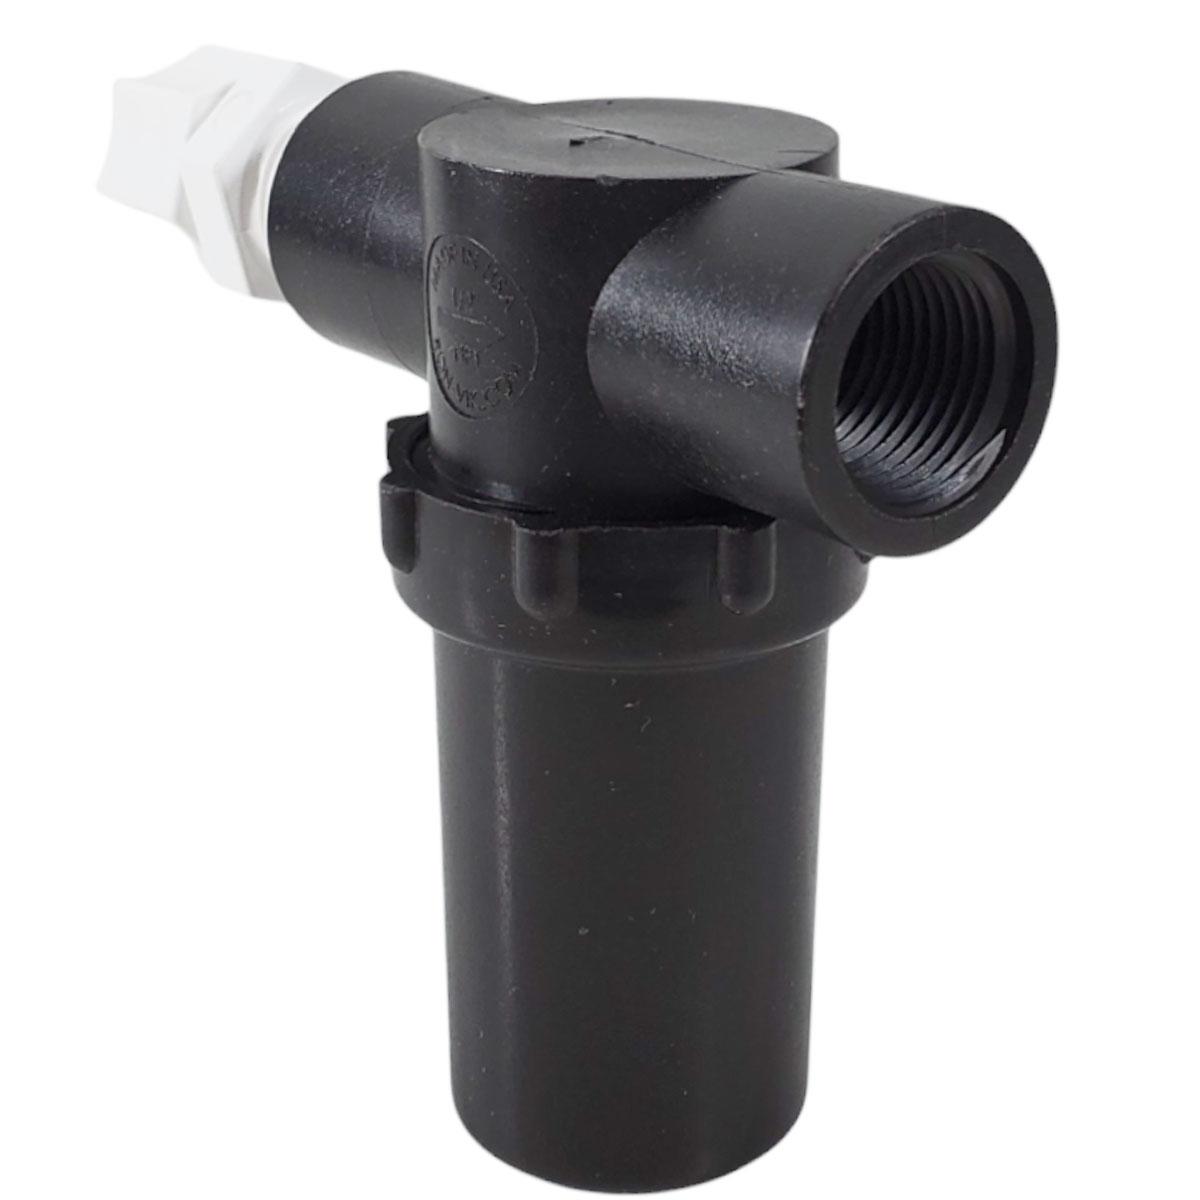 523441Z In-Line Filter and Jaco Fitting for Pentair EC-523476 and 523476 ChemCheck Swimming Pool Water Testing, Swimming Pool Water Quality Monitoring System